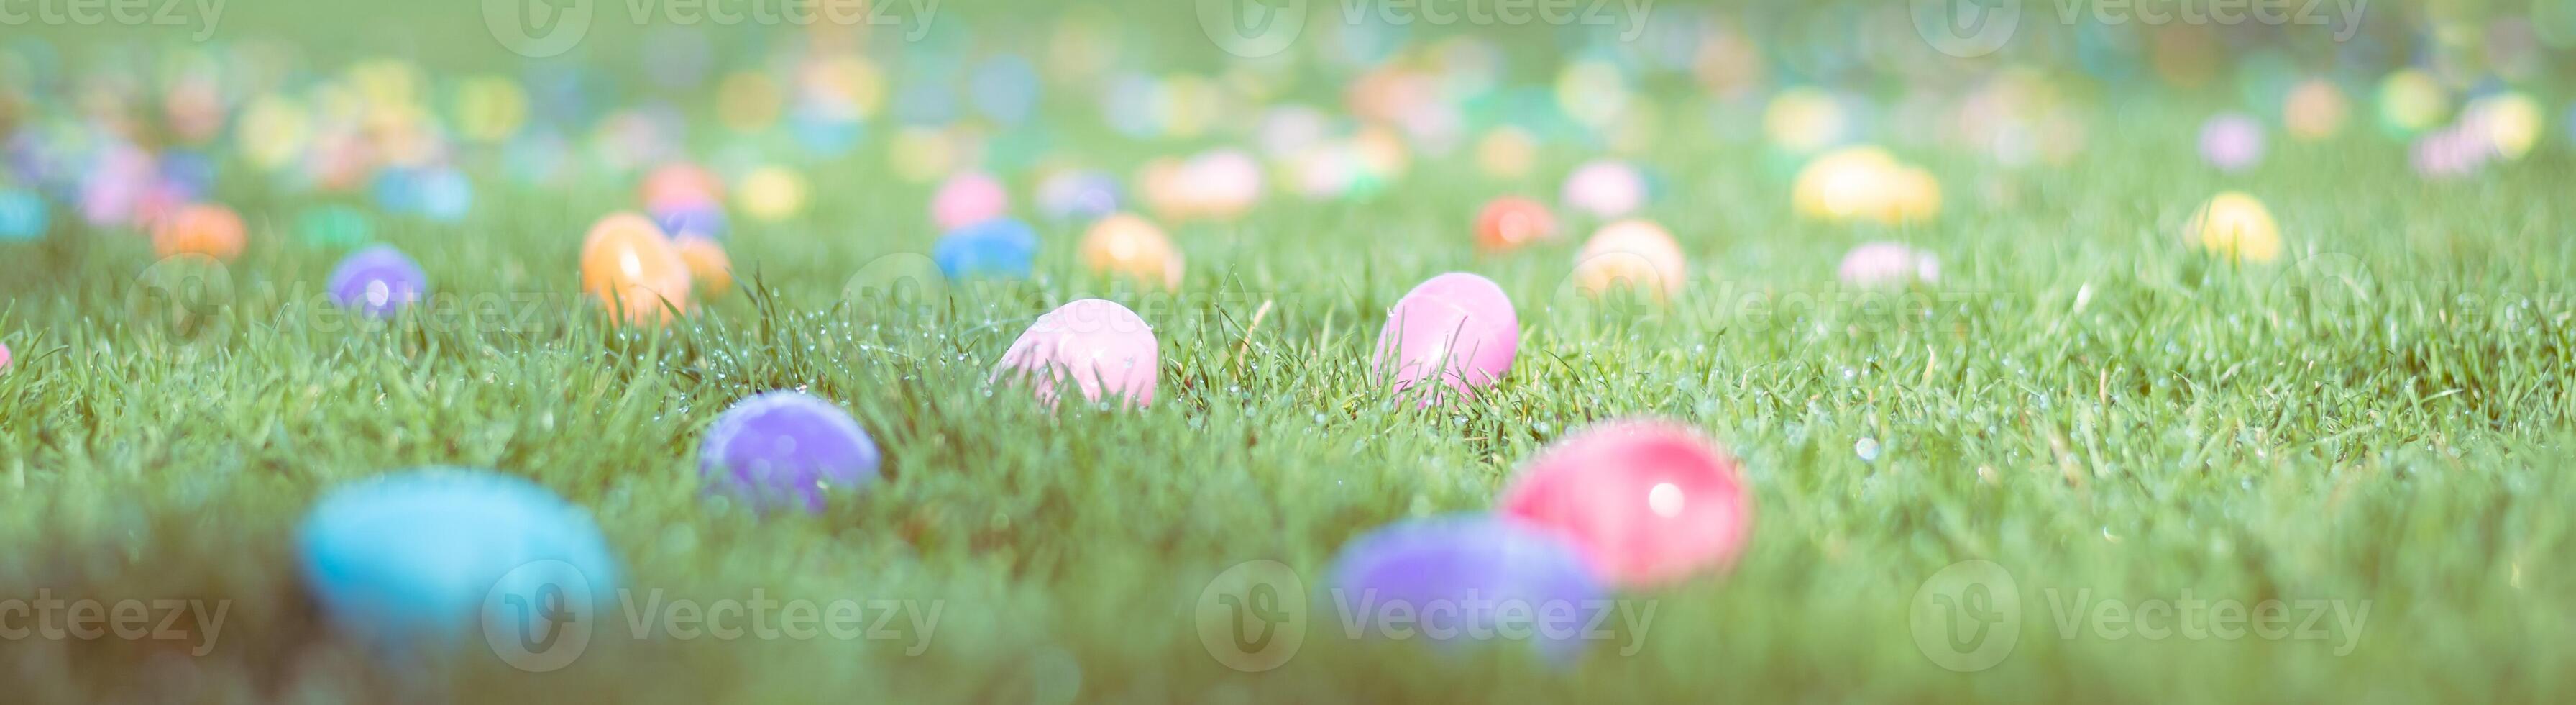 Plastic Colored Easter Eggs Spread in a Grassy Field for Child Egg Hunt photo